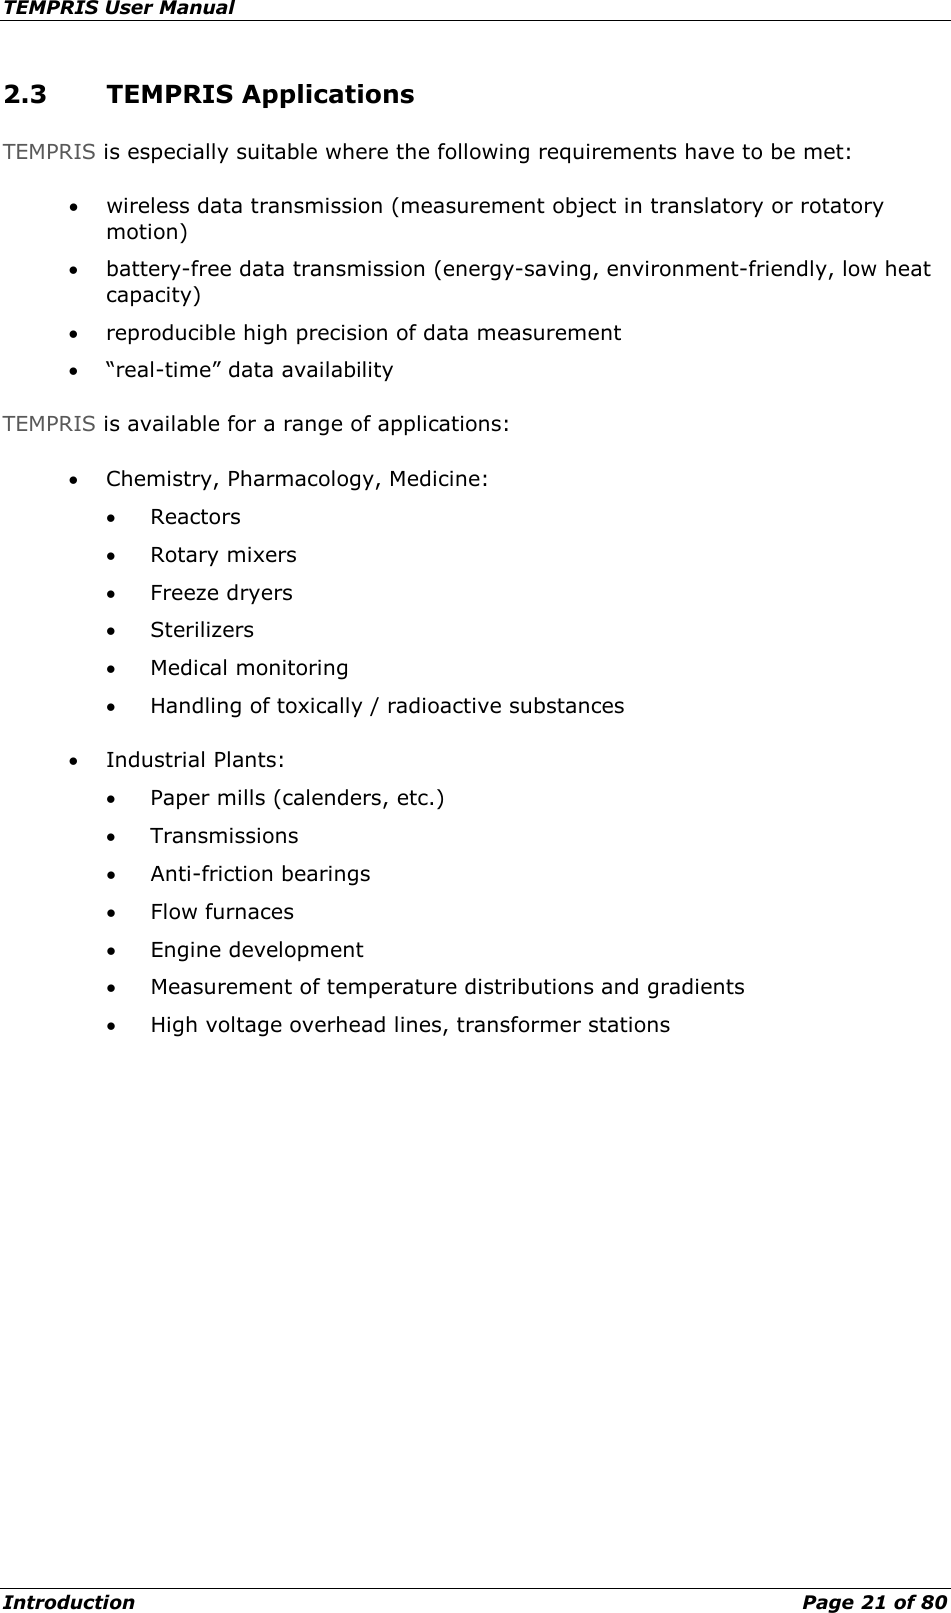 TEMPRIS User Manual Introduction    Page 21 of 80 2.3 TEMPRIS Applications TEMPRIS is especially suitable where the following requirements have to be met: • wireless data transmission (measurement object in translatory or rotatory motion) • battery-free data transmission (energy-saving, environment-friendly, low heat capacity) • reproducible high precision of data measurement • “real-time” data availability TEMPRIS is available for a range of applications: • Chemistry, Pharmacology, Medicine: • Reactors • Rotary mixers • Freeze dryers • Sterilizers • Medical monitoring • Handling of toxically / radioactive substances • Industrial Plants: • Paper mills (calenders, etc.) • Transmissions • Anti-friction bearings • Flow furnaces • Engine development • Measurement of temperature distributions and gradients • High voltage overhead lines, transformer stations   